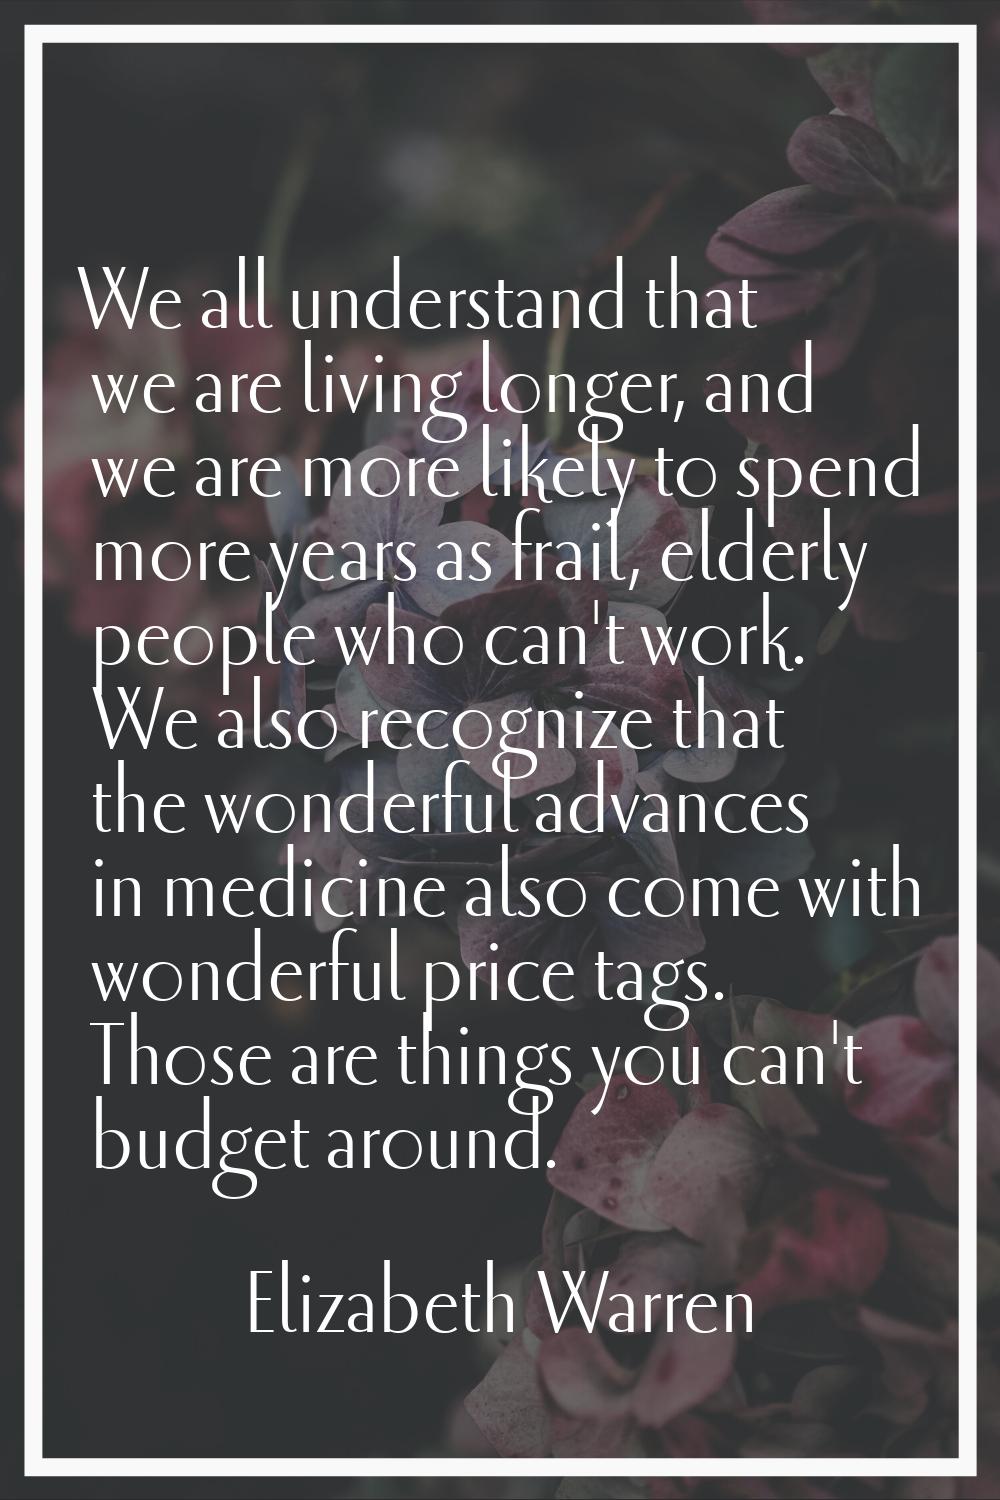 We all understand that we are living longer, and we are more likely to spend more years as frail, e